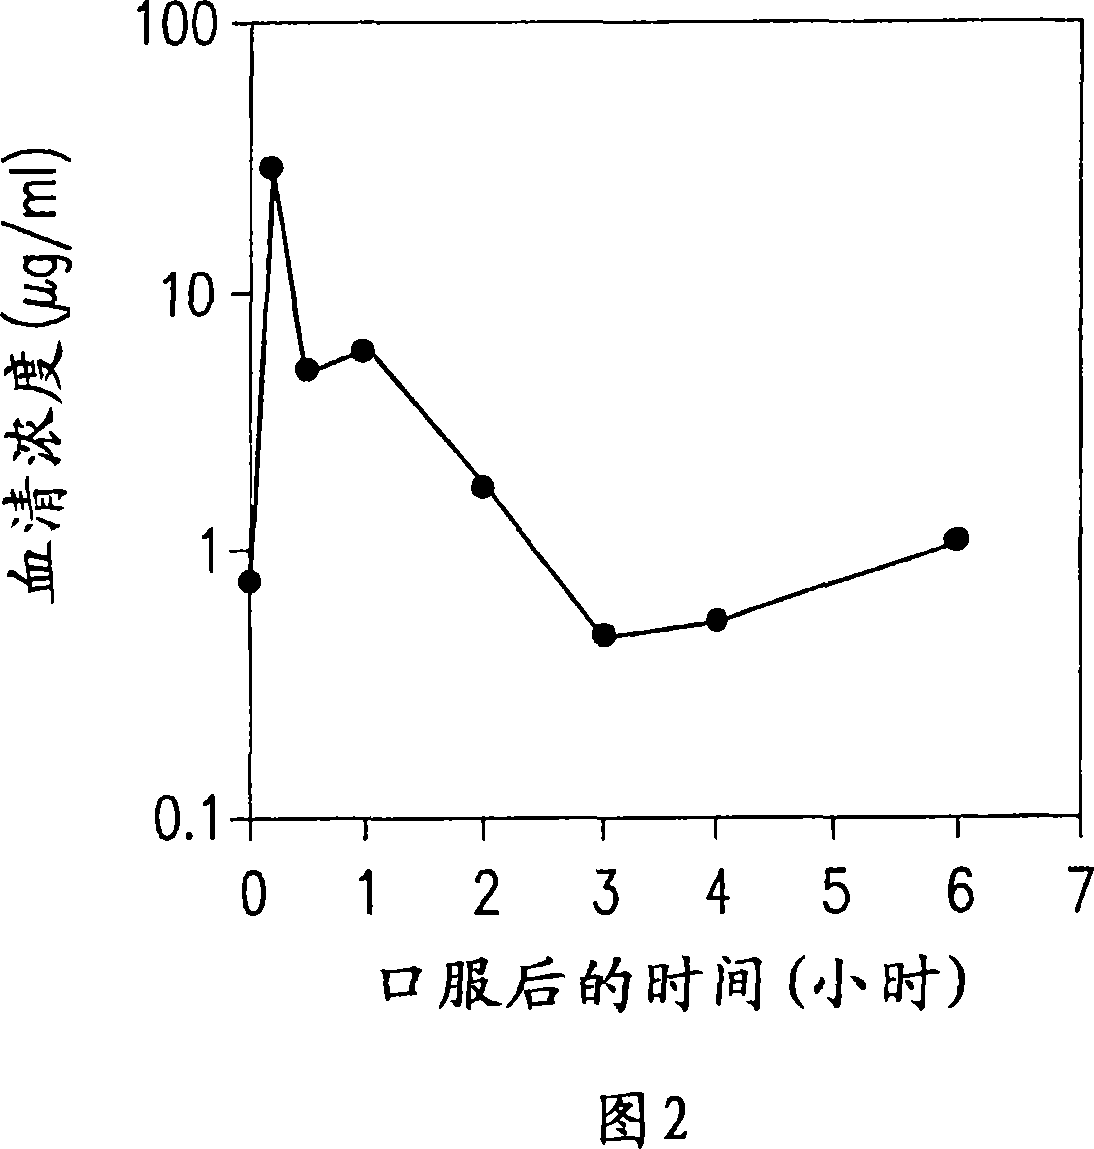 Dried forms of aqueous solubilized bile acid dosage formulation, preparation and uses thereof